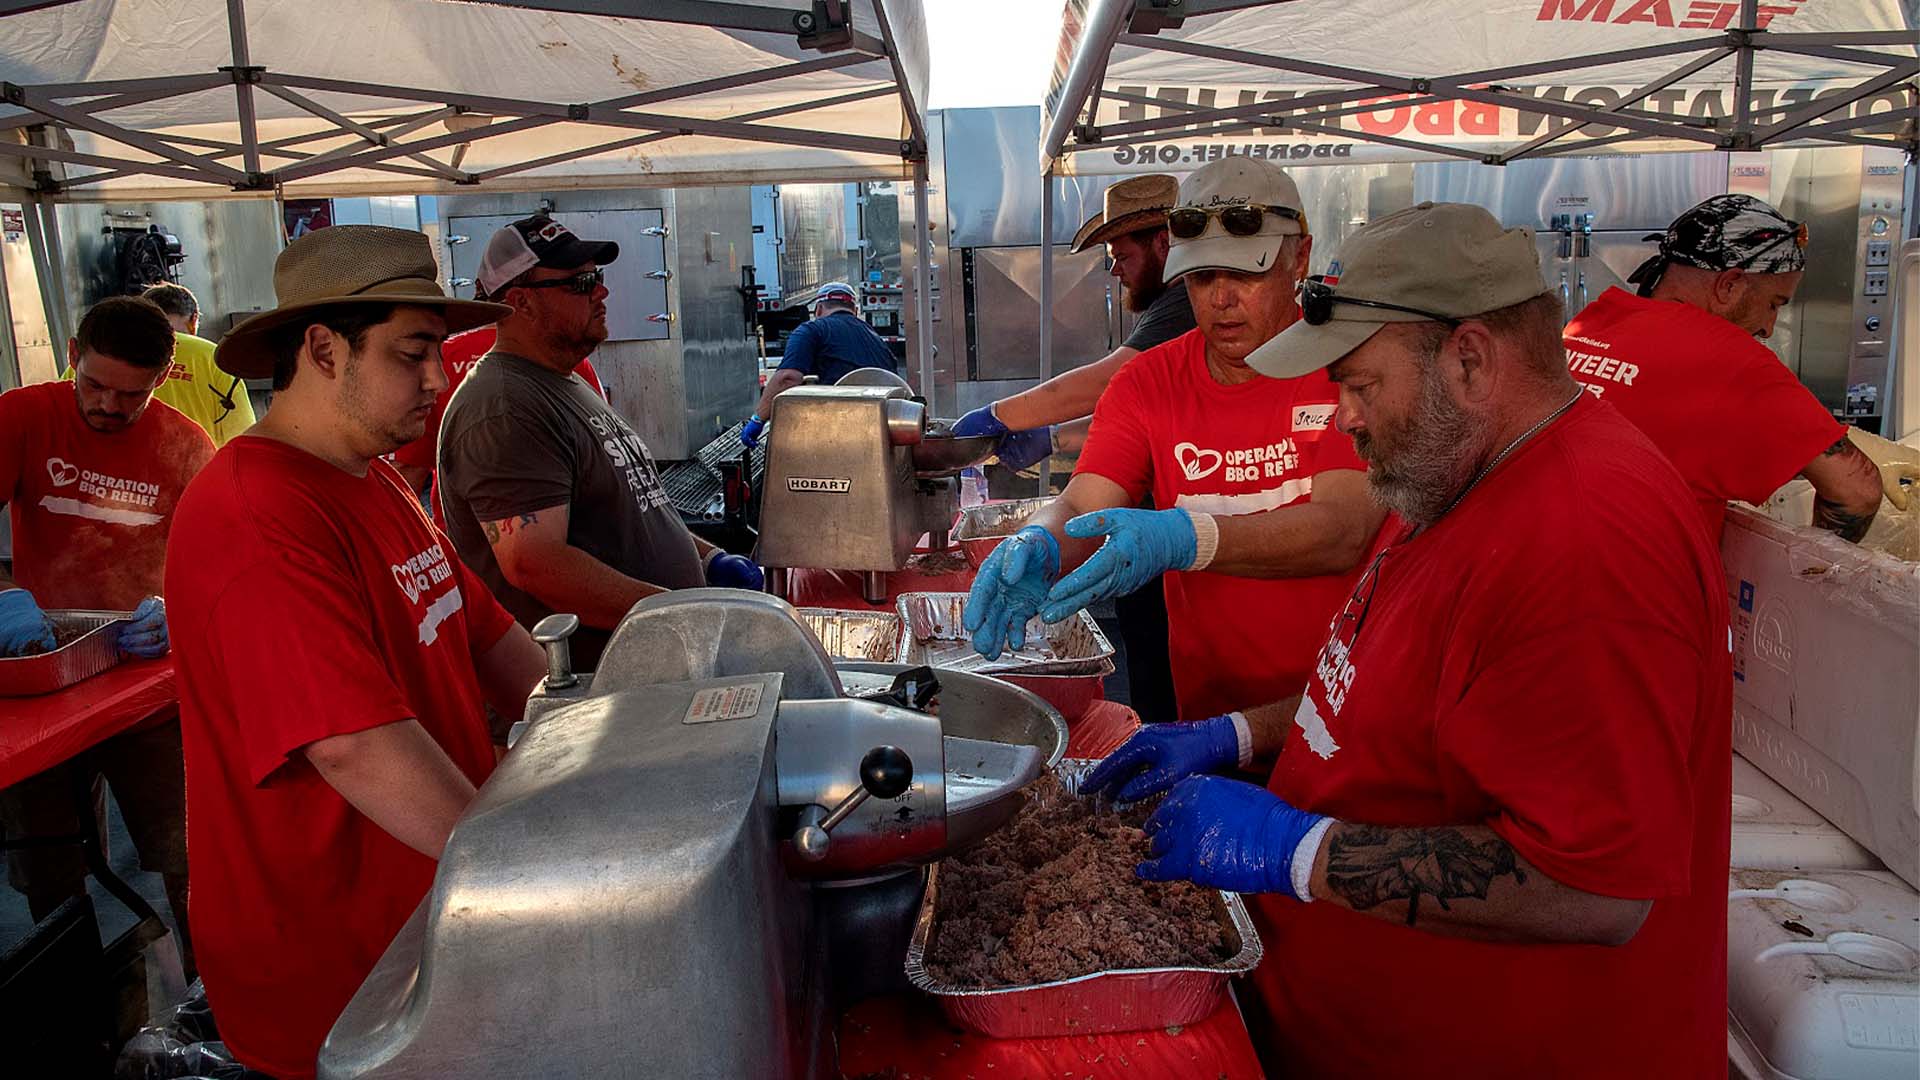 Teams with Operation BBQ Relief cook a meal after being deployed.